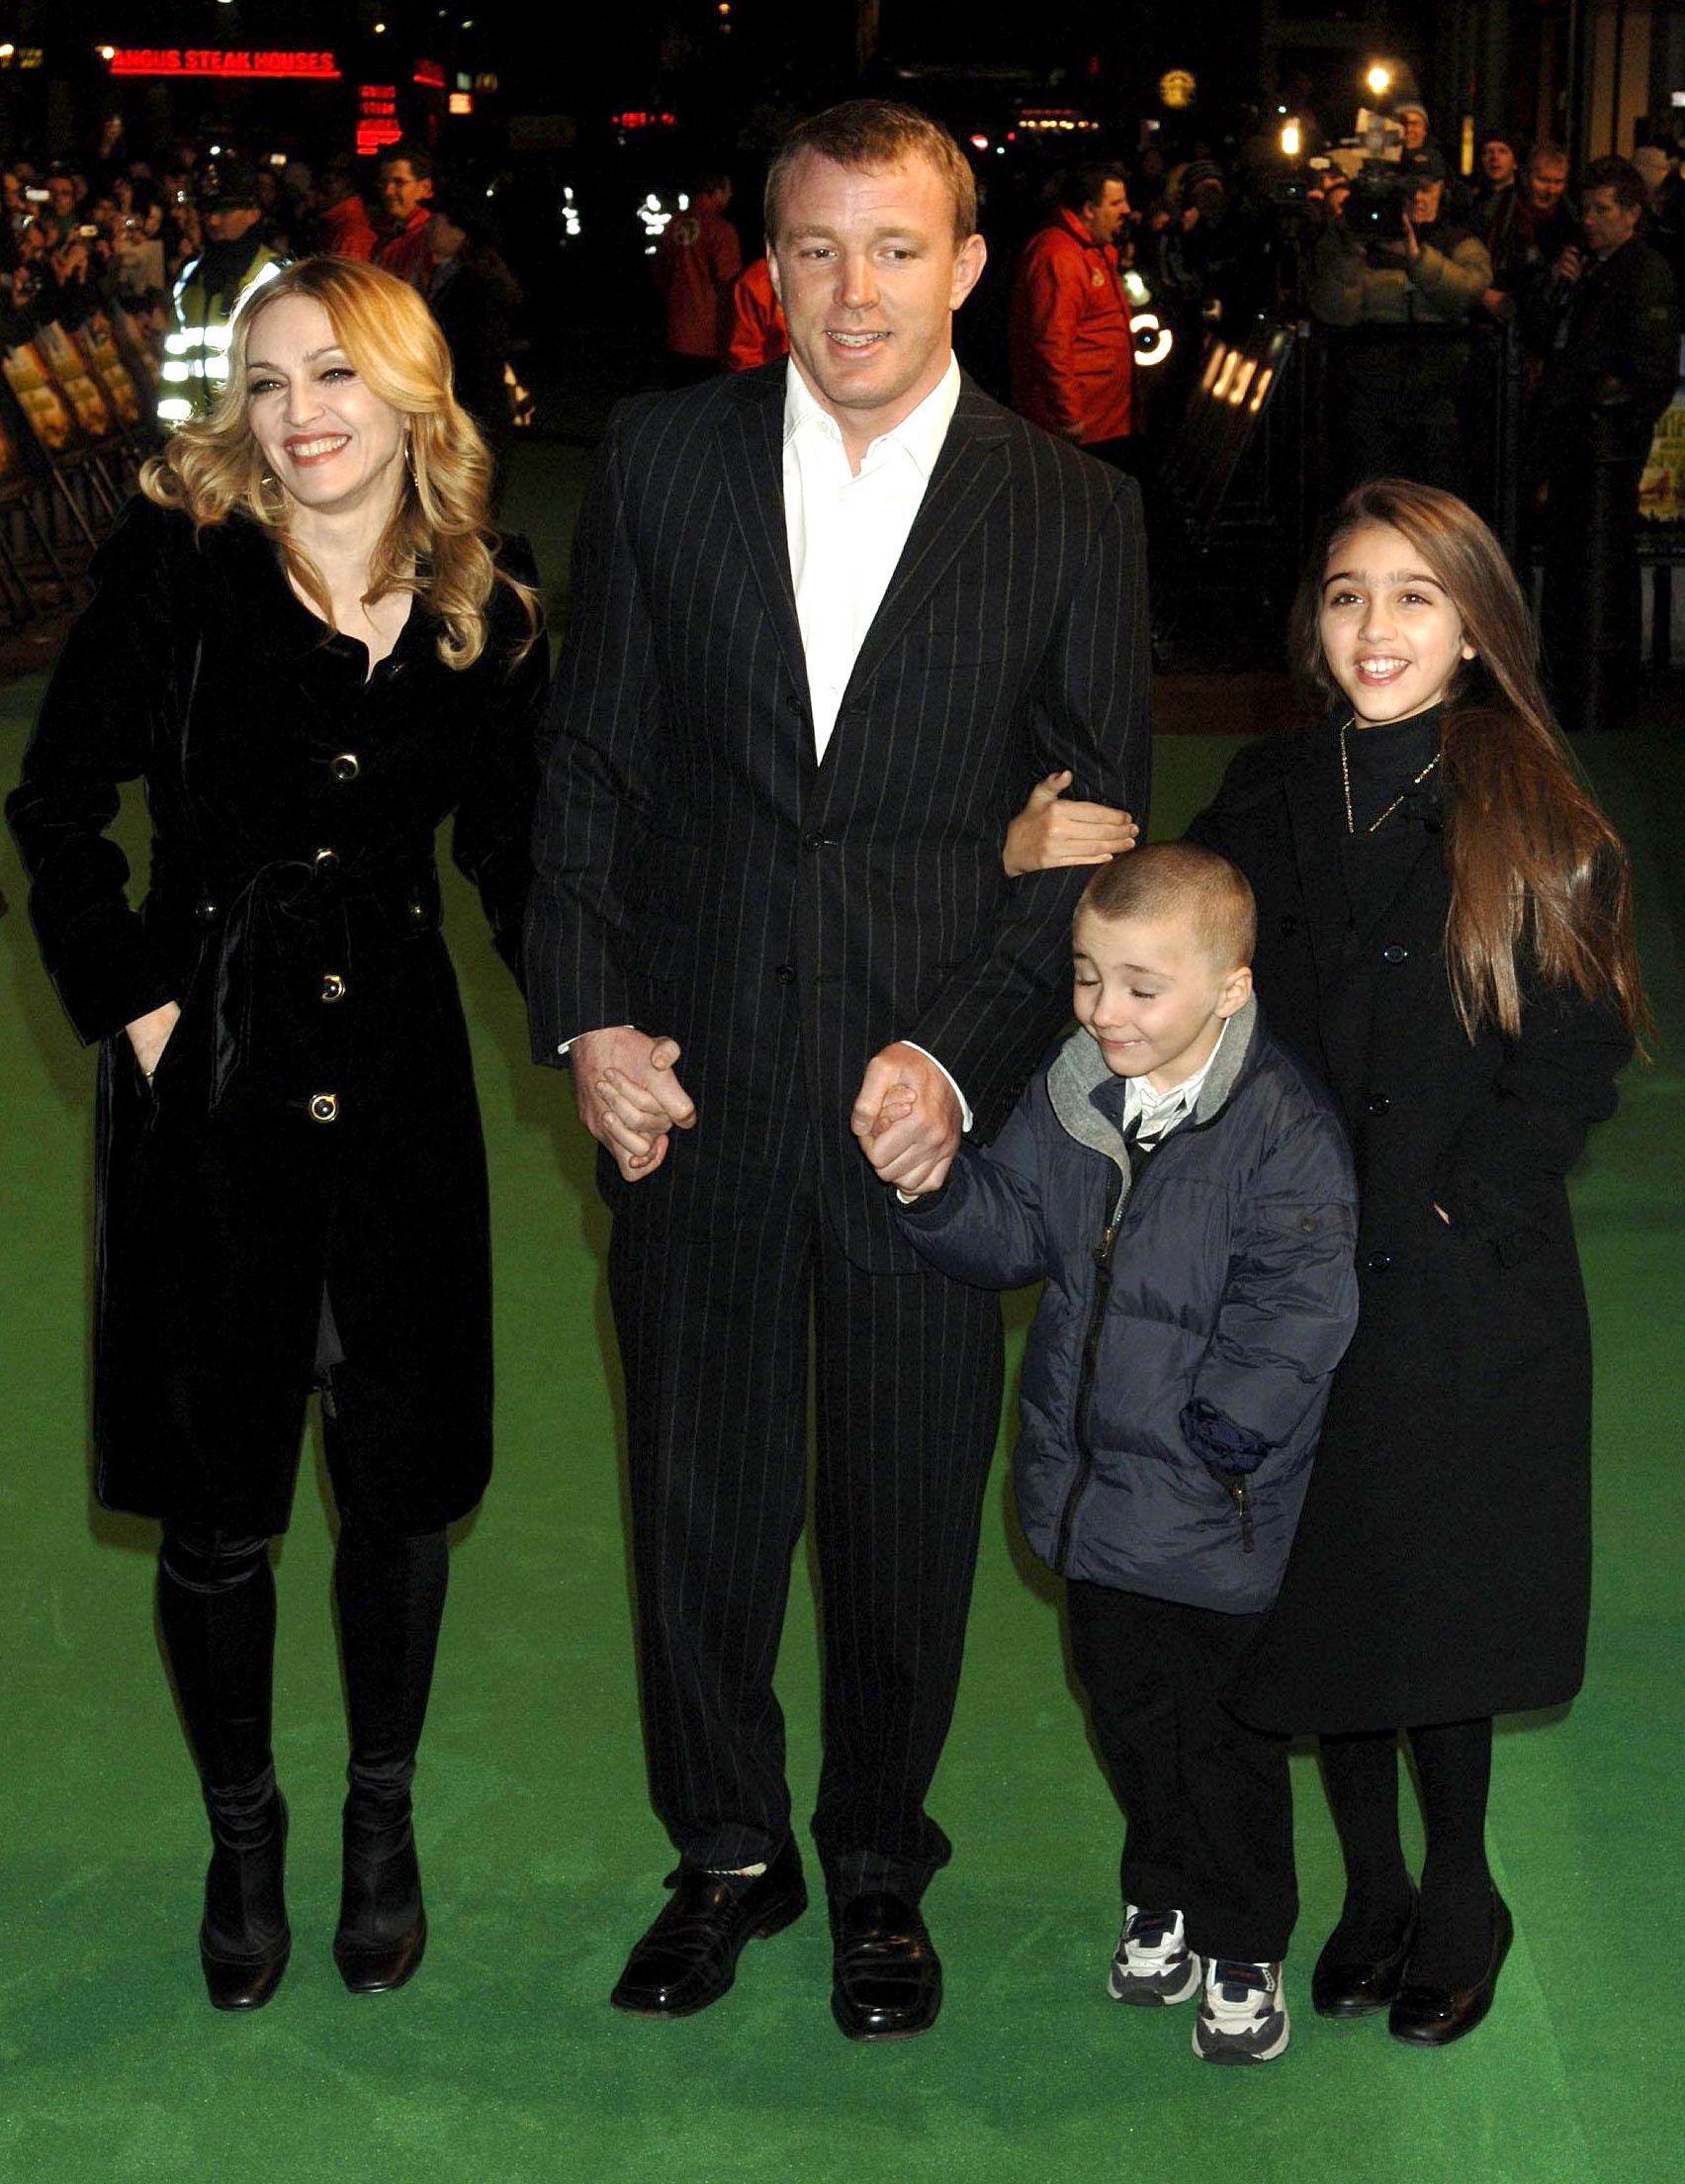 Madonna, Guy Ritchie, Rocco and Lola in London on January 25, 2007 | Source: Getty Images